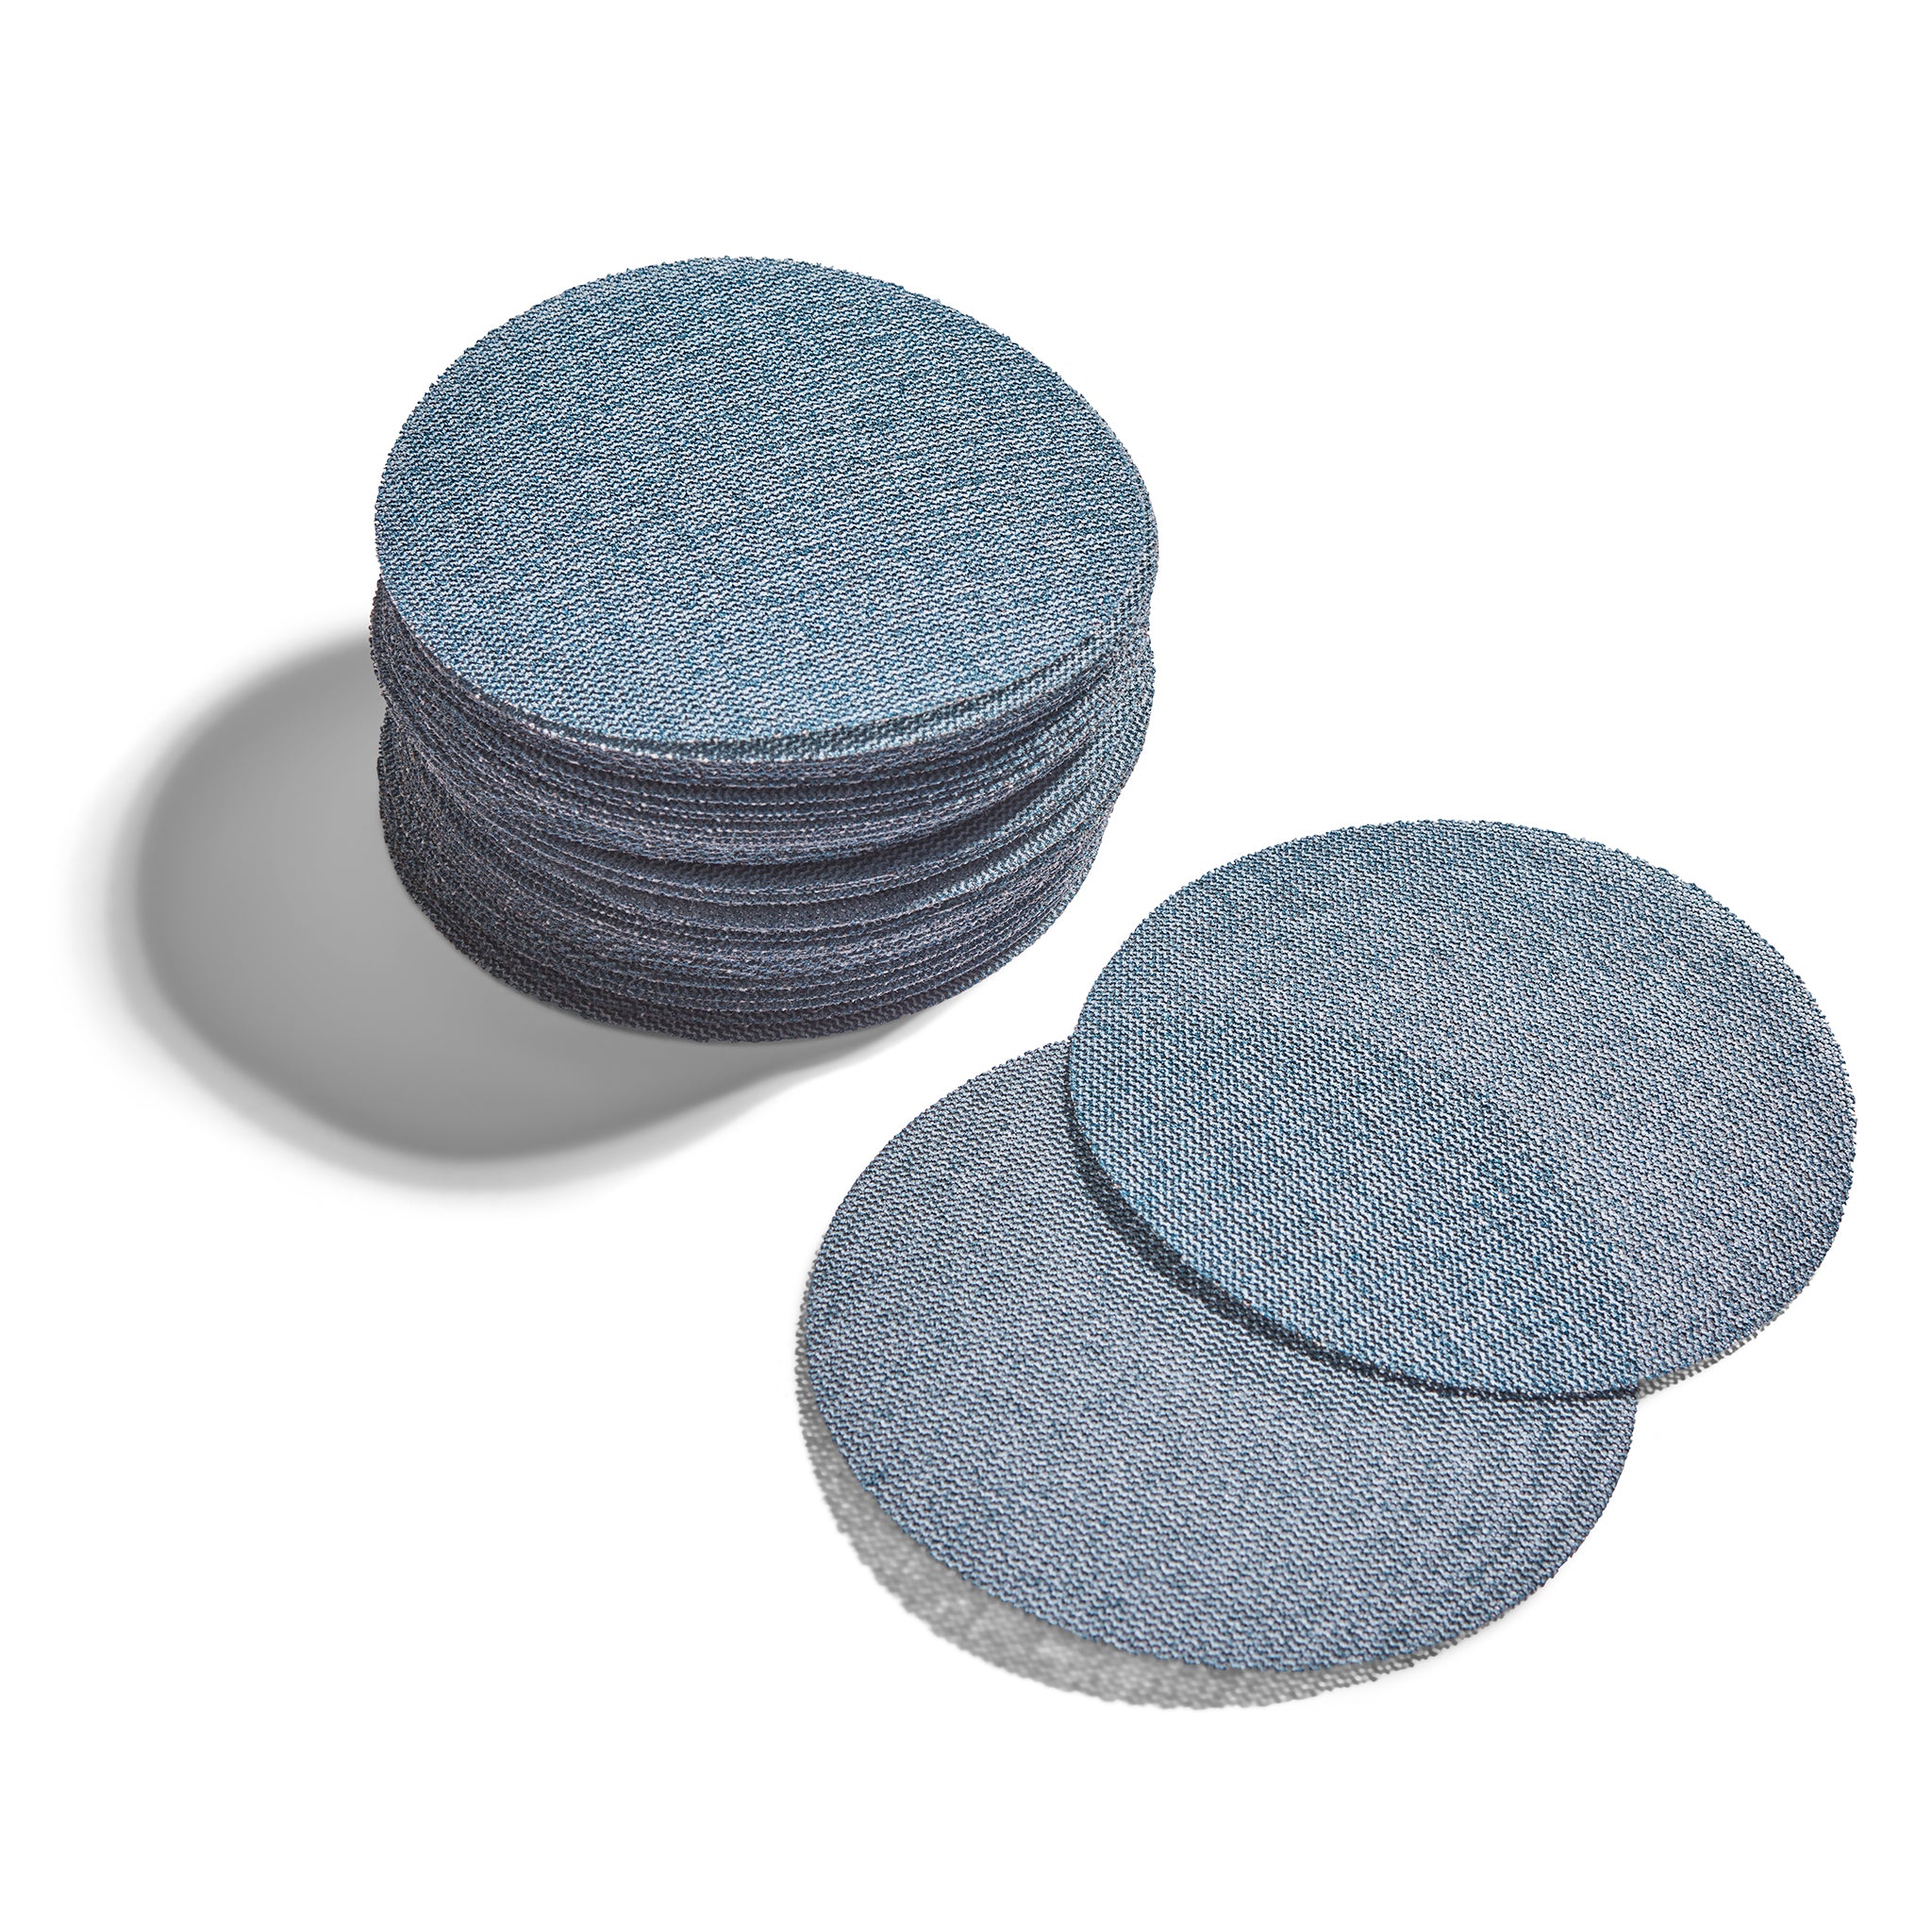 125mm Net Abrasive Discs - Mixed Pack of 50